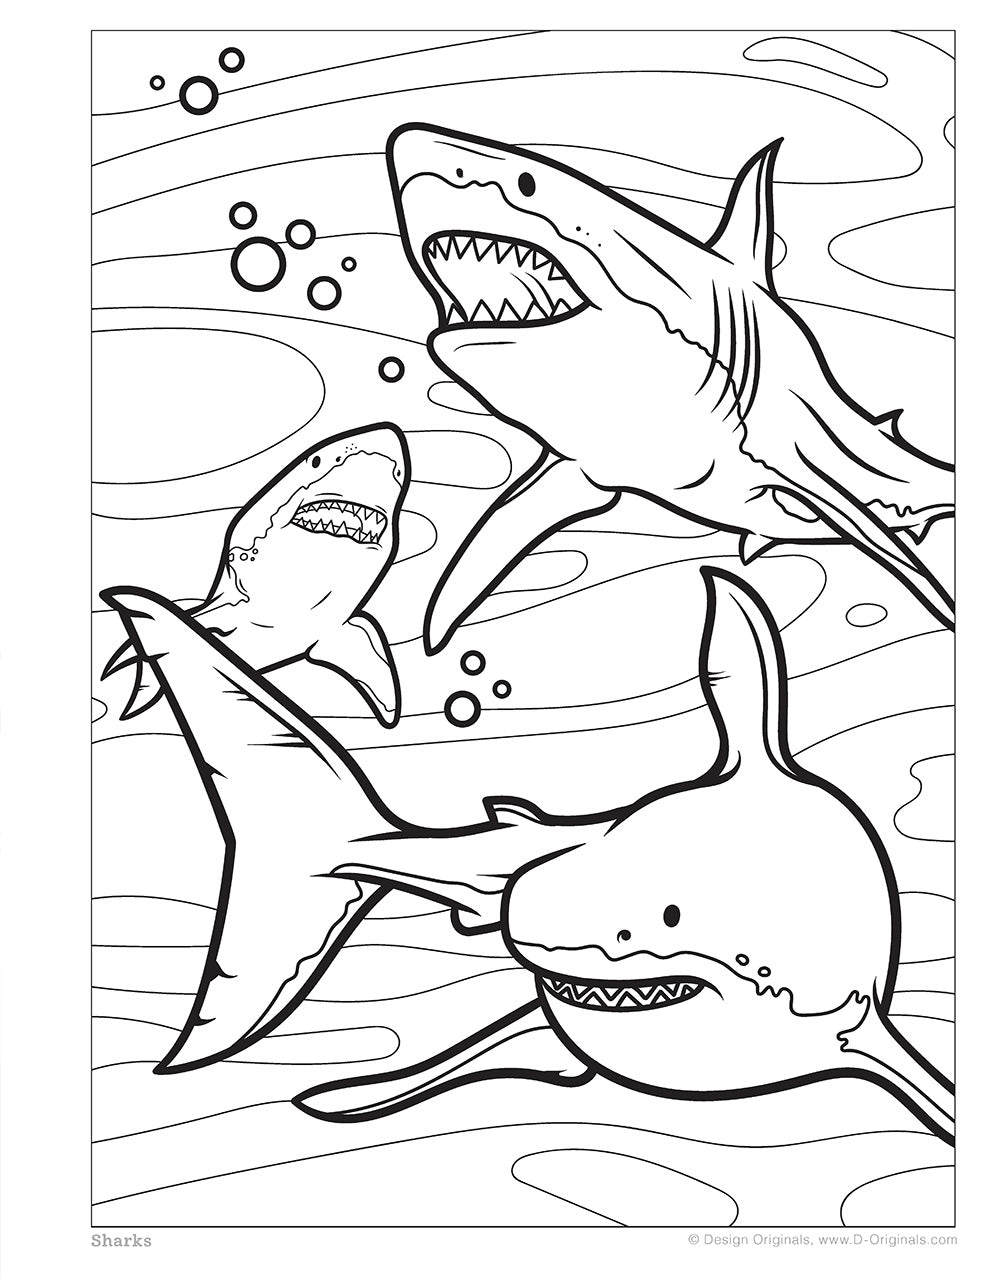 Sharks and ocean creatures coloring book â fox chapel publishing co